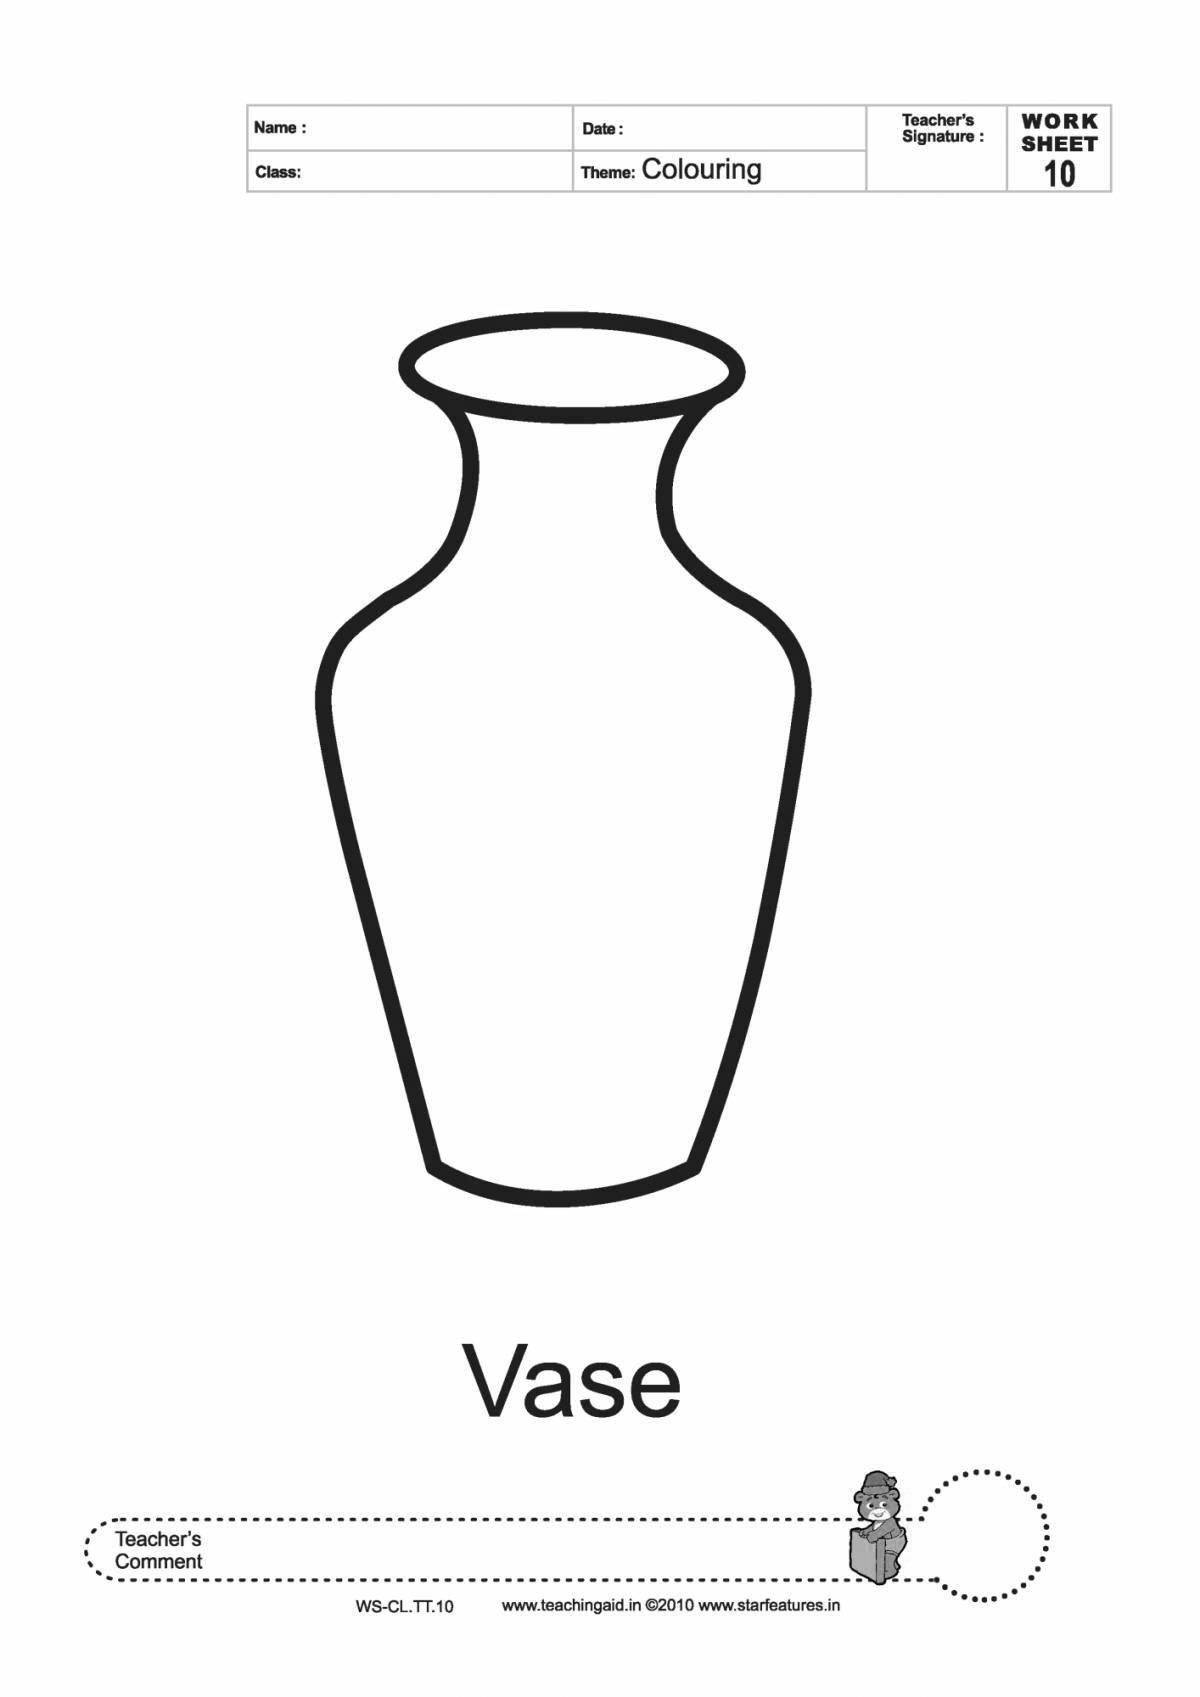 Great coloring vase